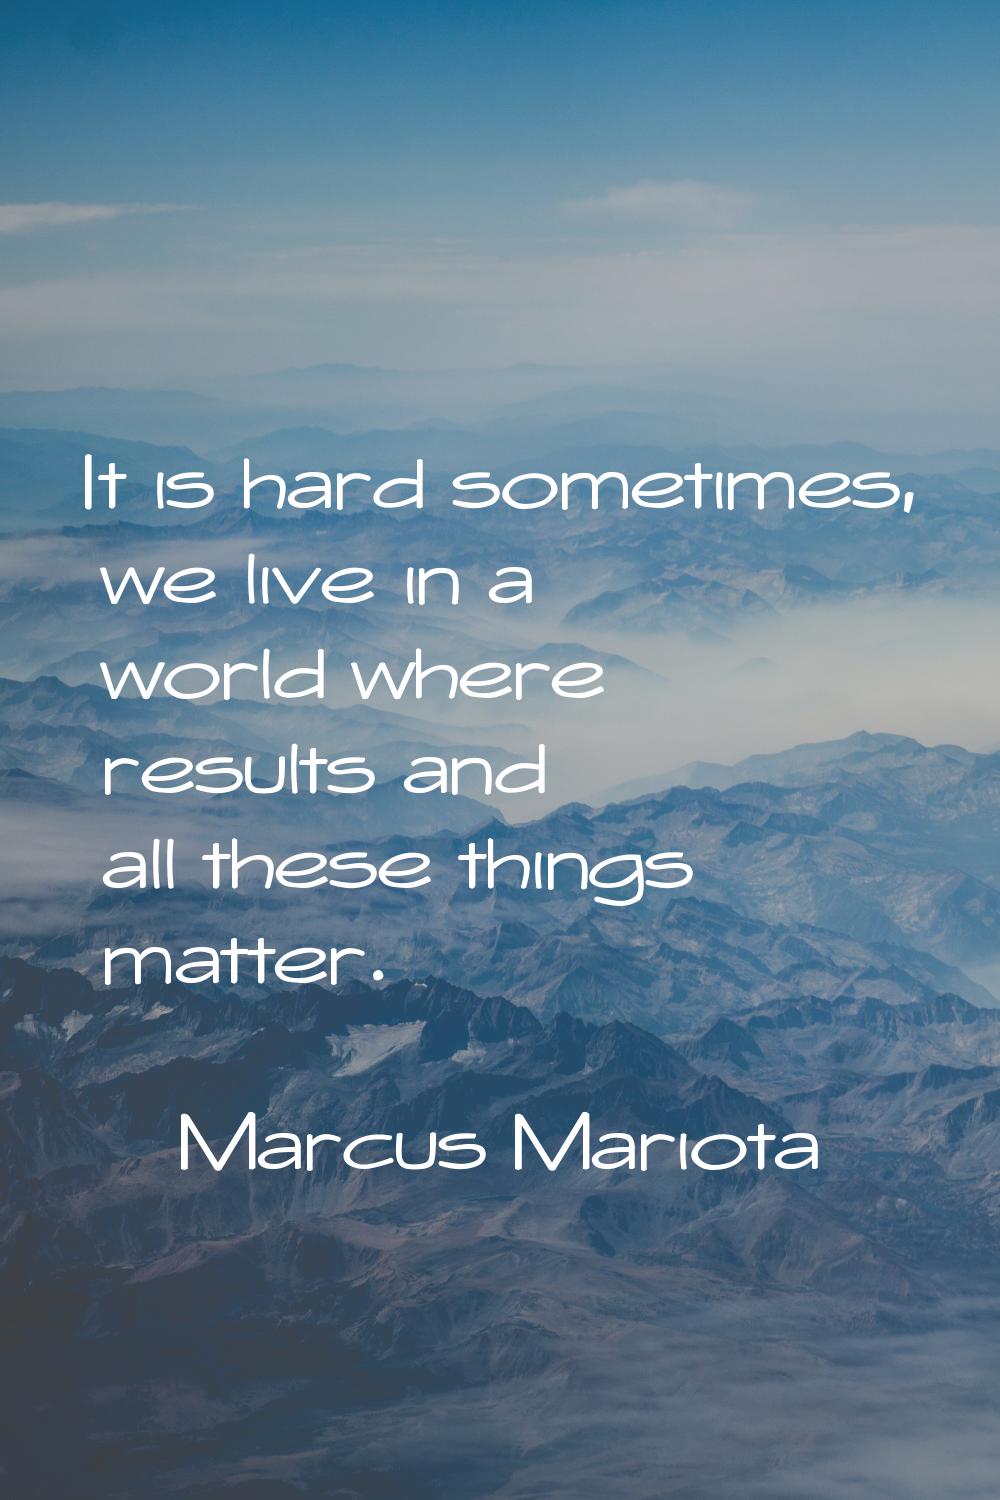 It is hard sometimes, we live in a world where results and all these things matter.